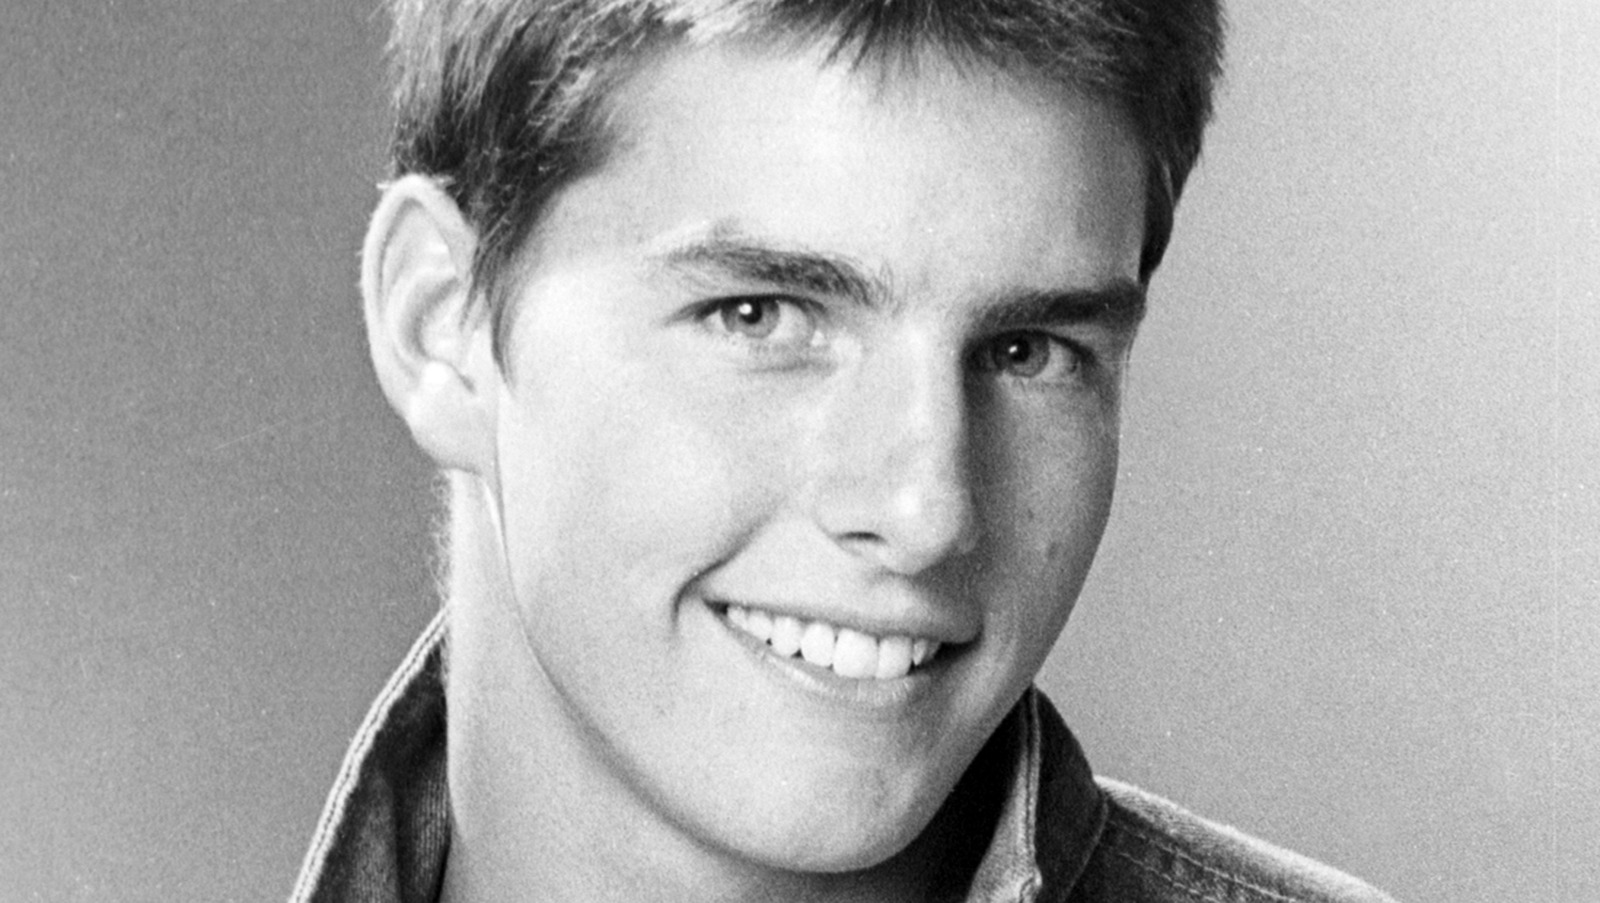 The Transformation Of Tom Cruise From 21 To 58 Years Old